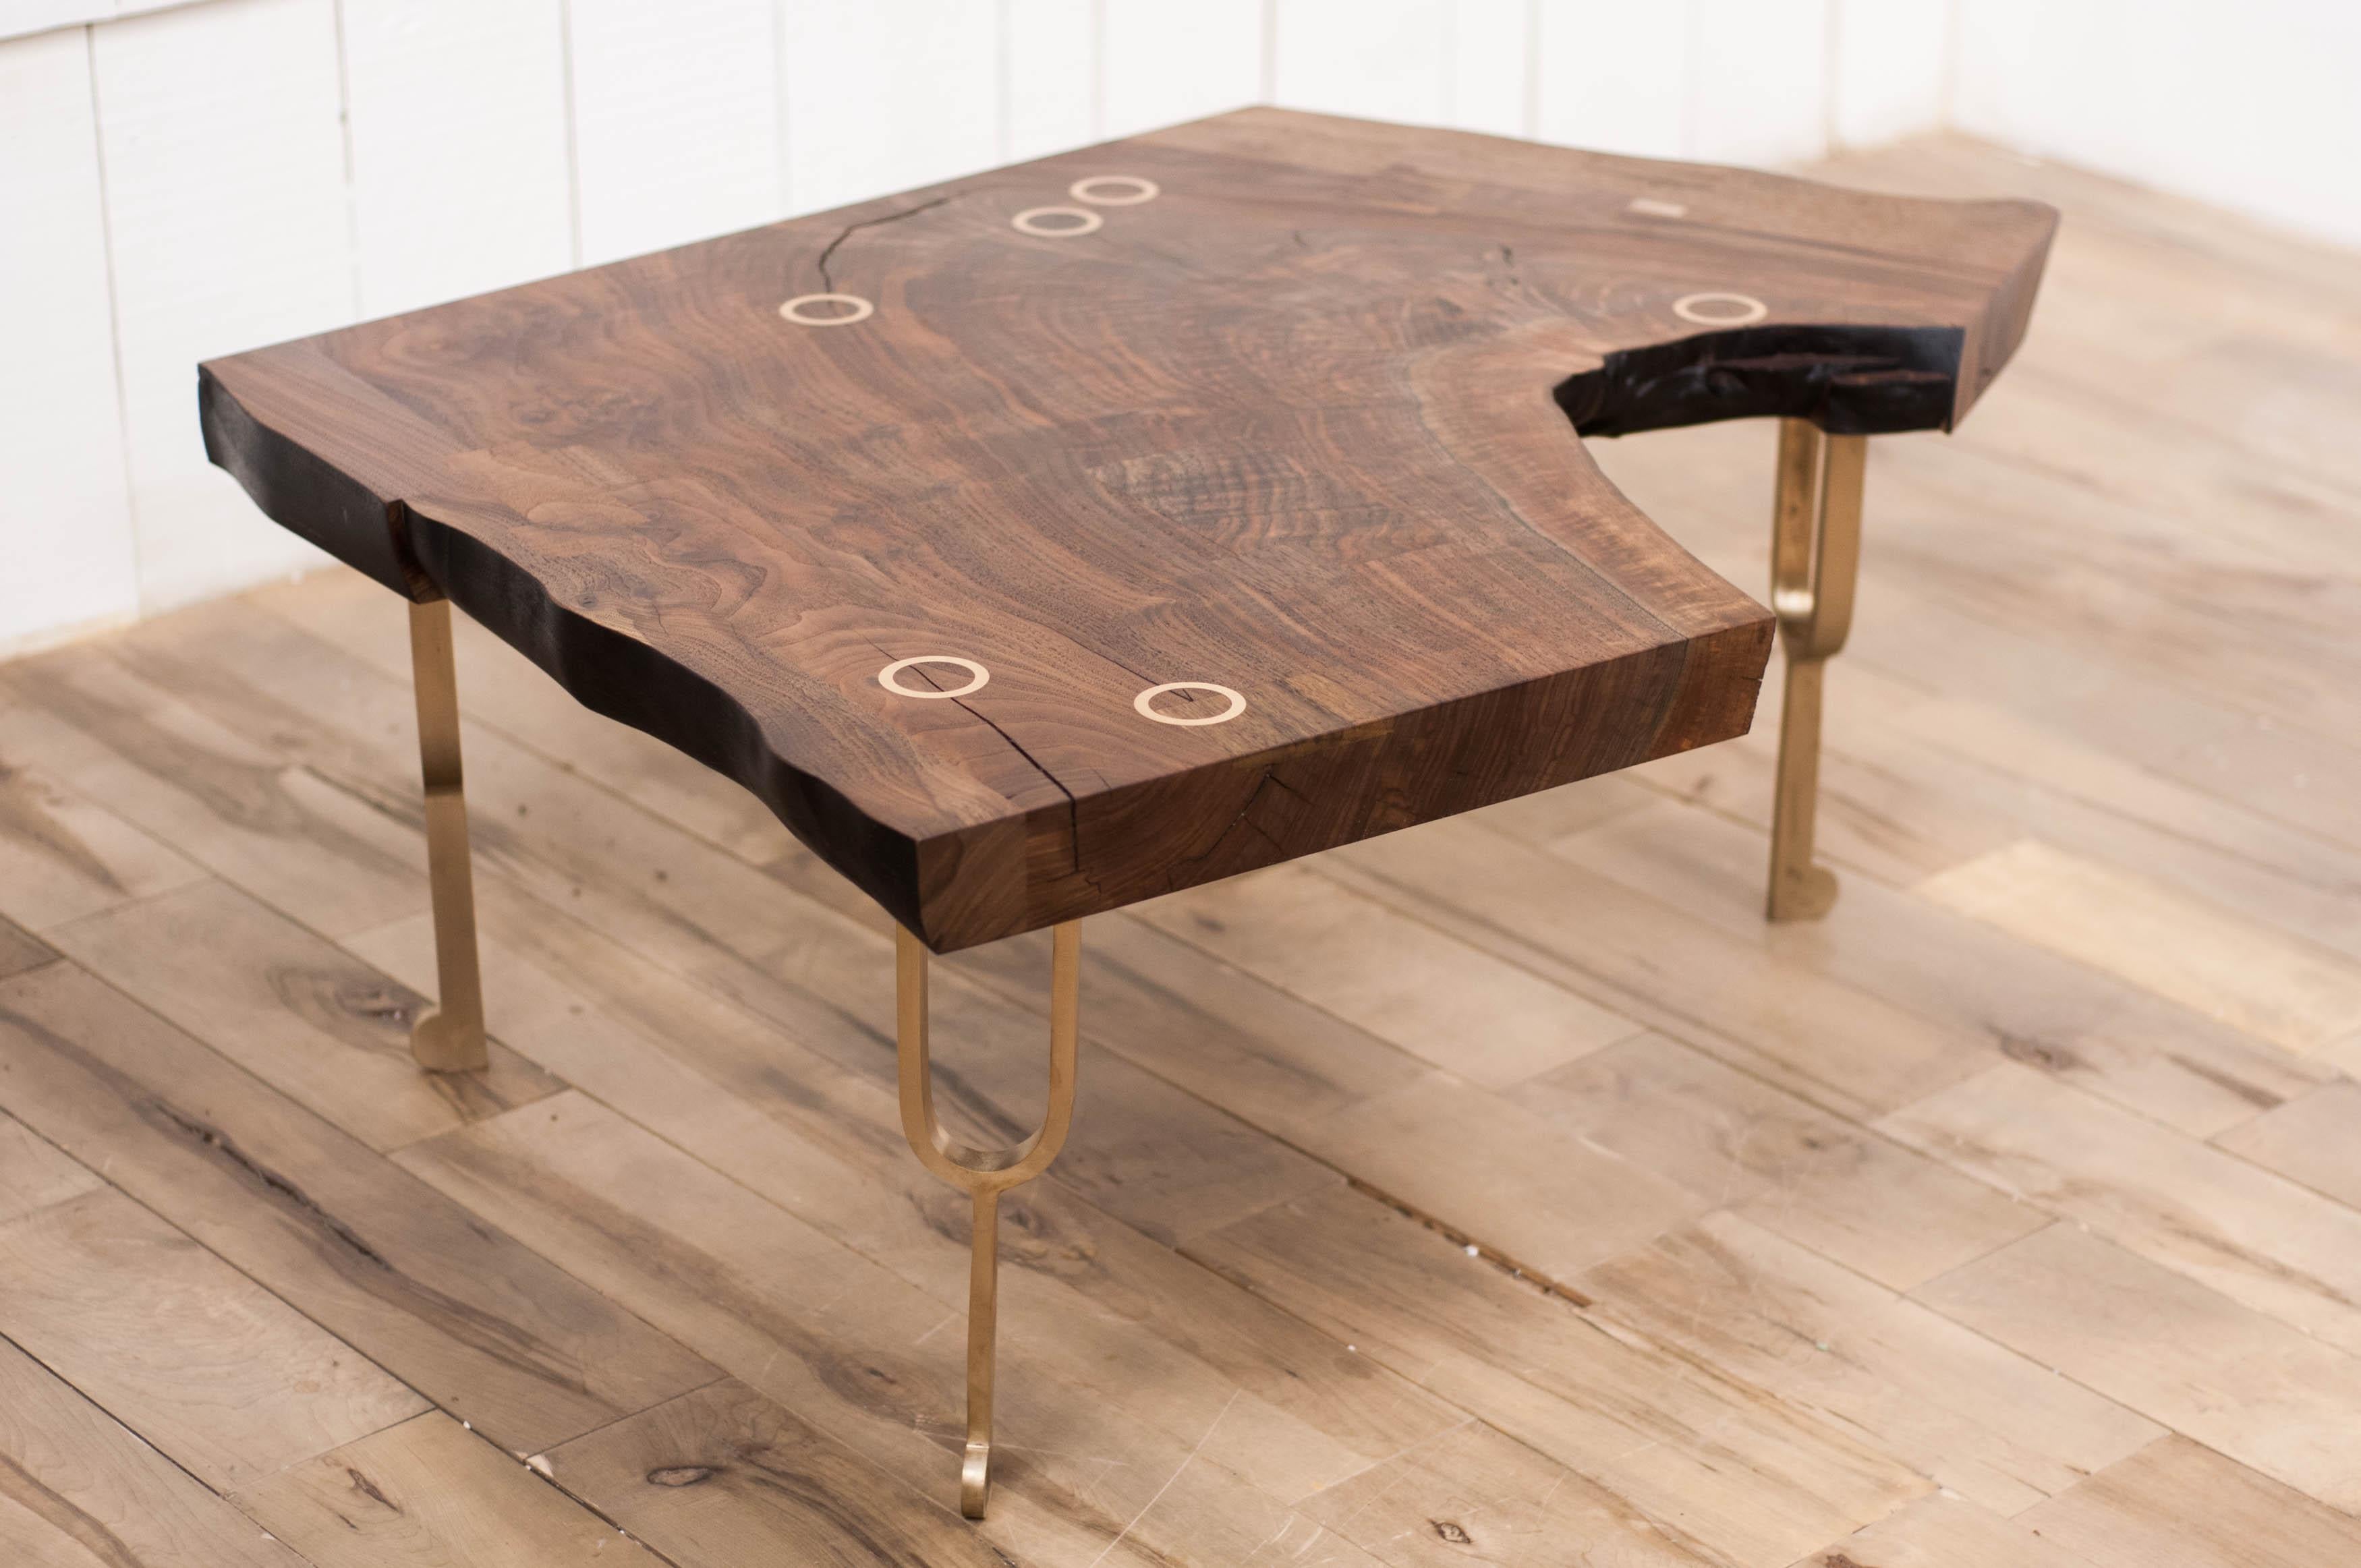 Tuning Fork Coffee Table in Satin Cast Bronze and Claro Walnut 2